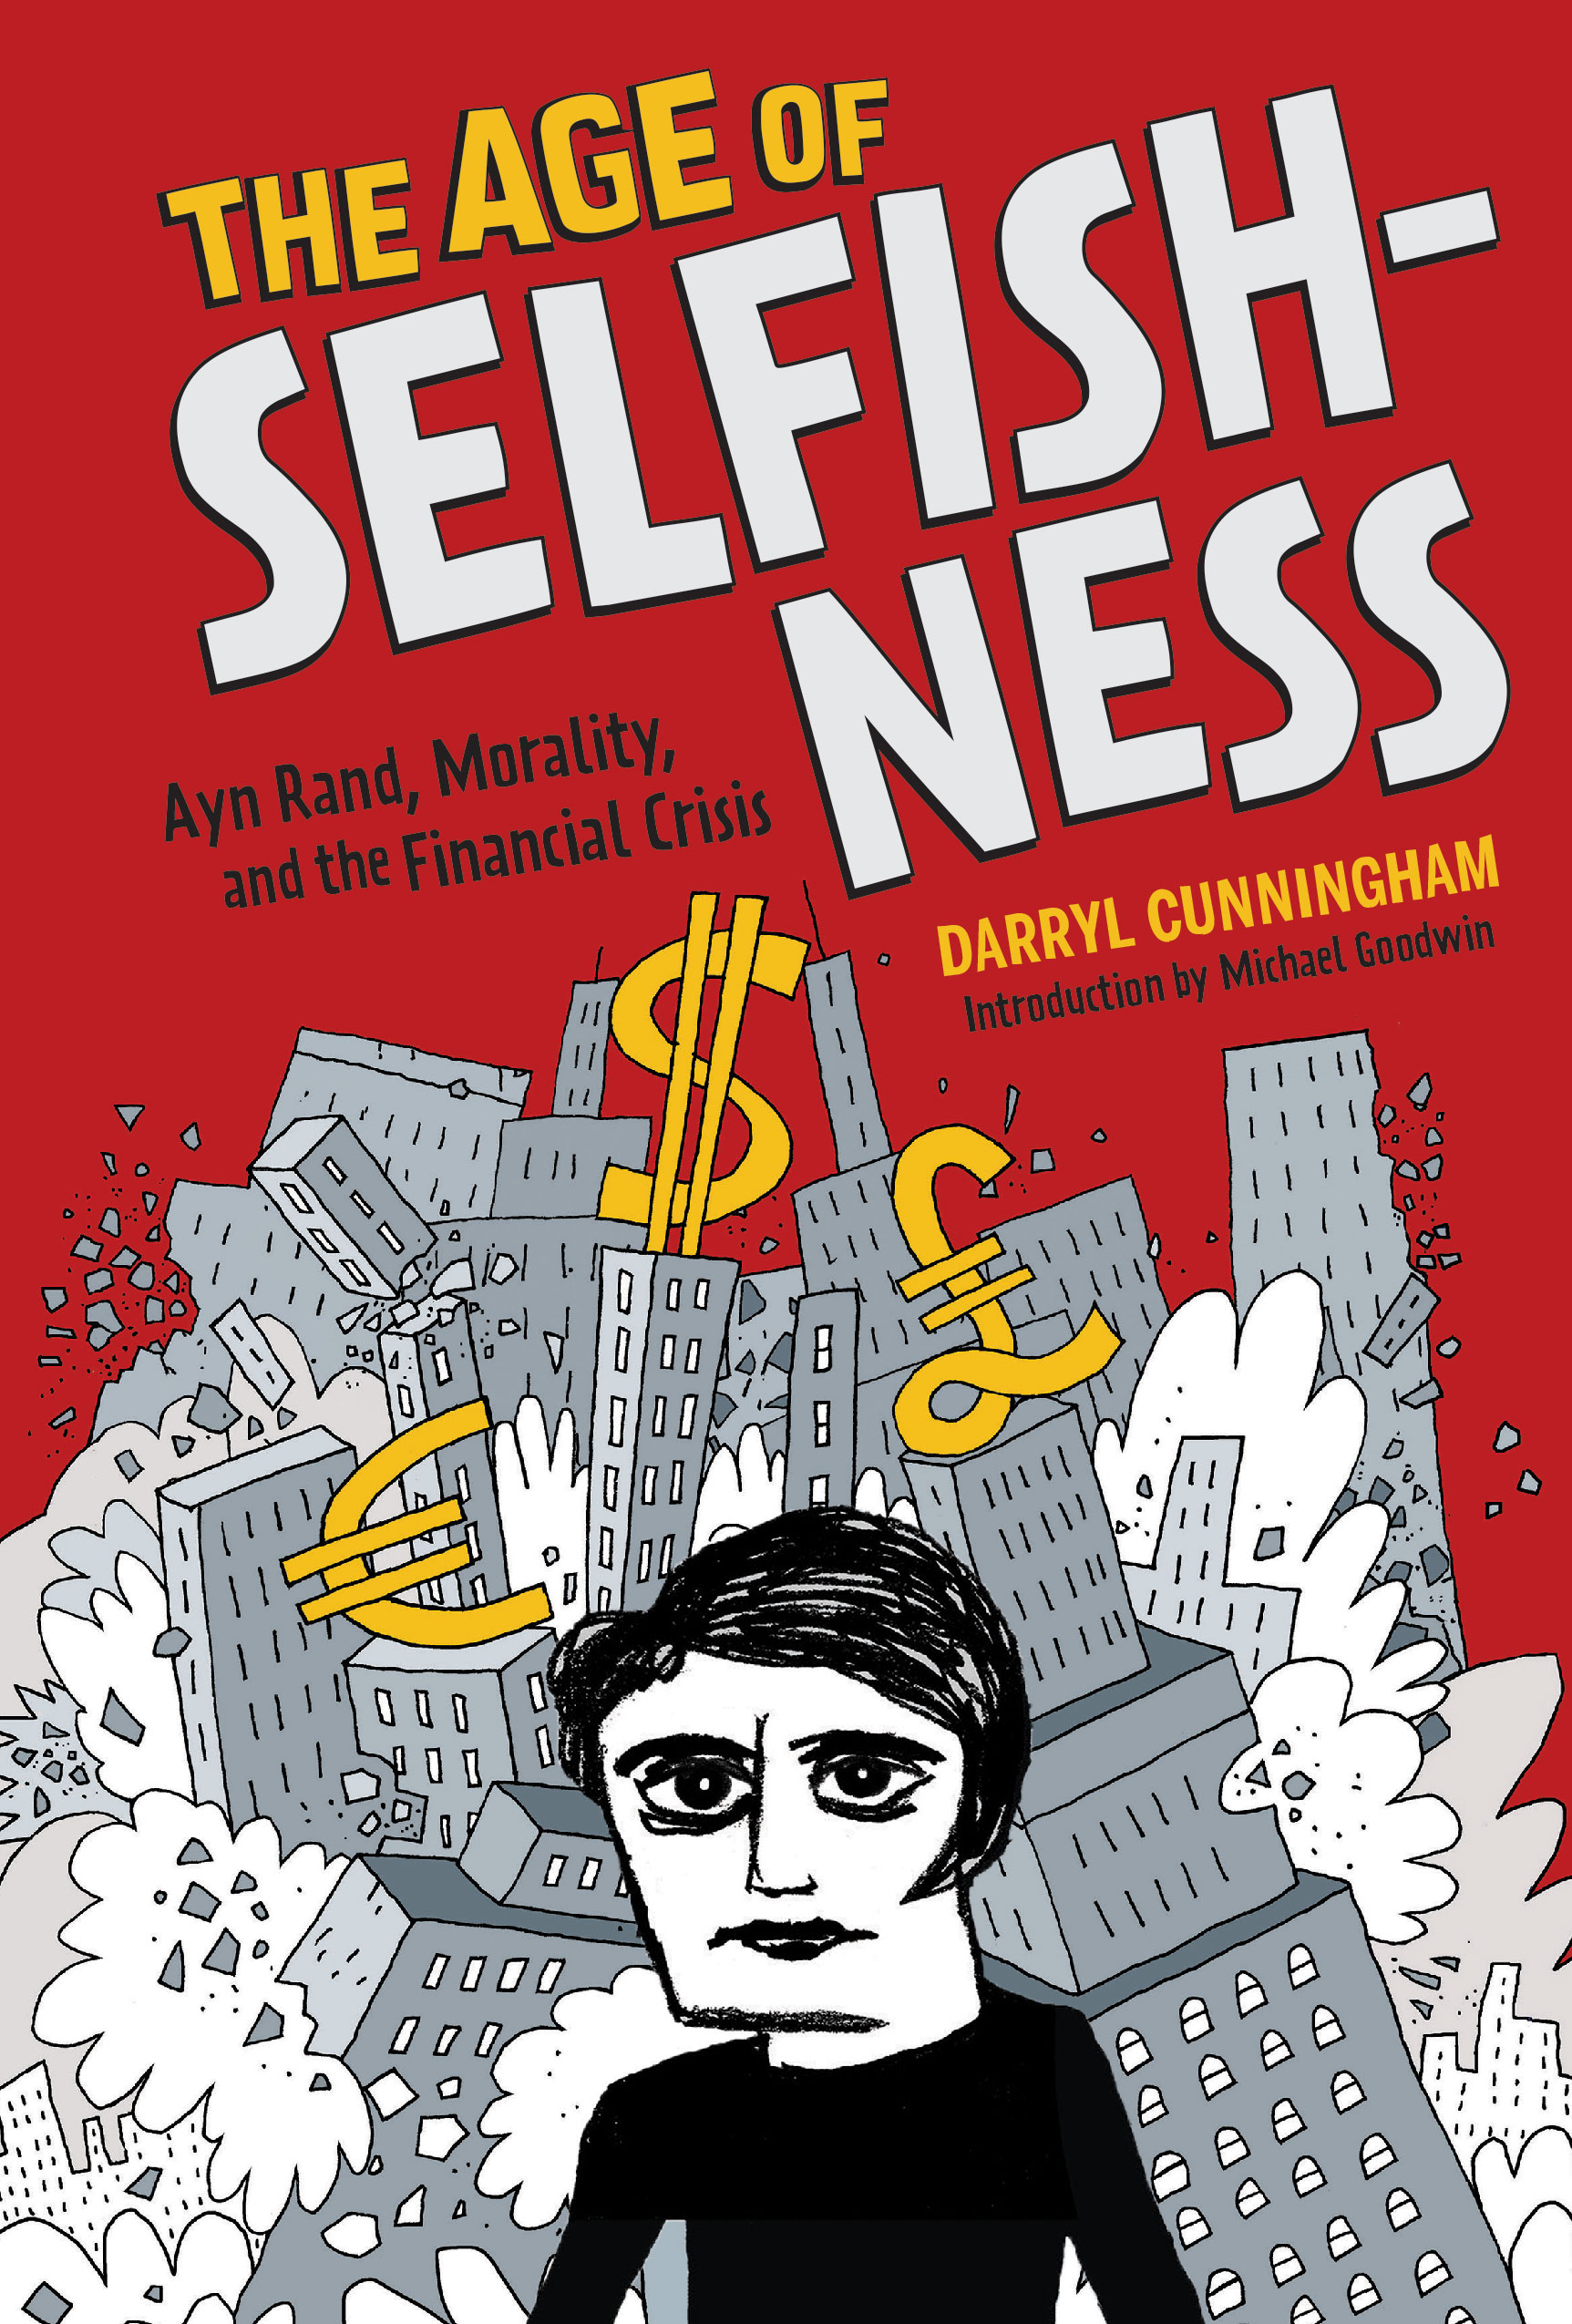 cover for Age of Selfishness by Darryl Cunningham